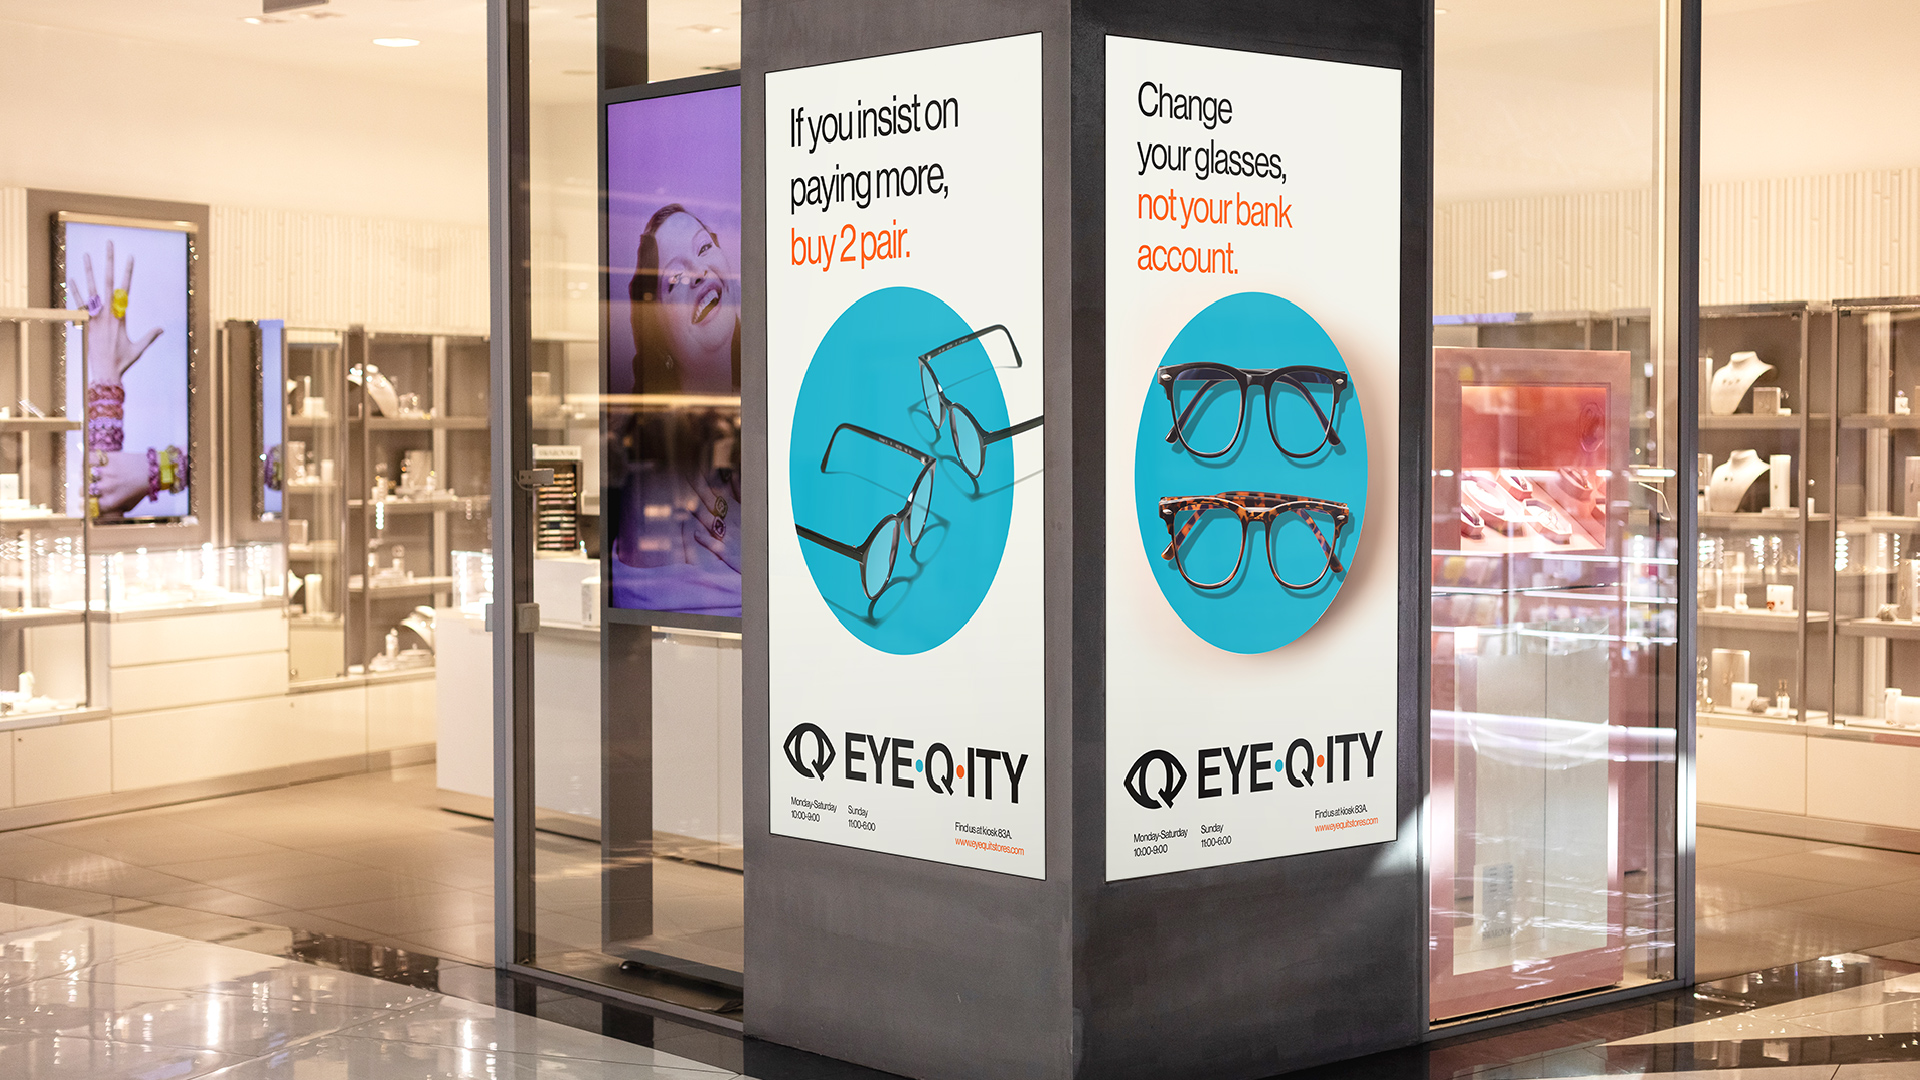 Two posters sit on either side of a storefront pillar. Both ads feature two pairs of glasses. One ad says, “If you insist on paying more, buy 2 pair.” The second ad says, “Change your glasses, not your bank account.”